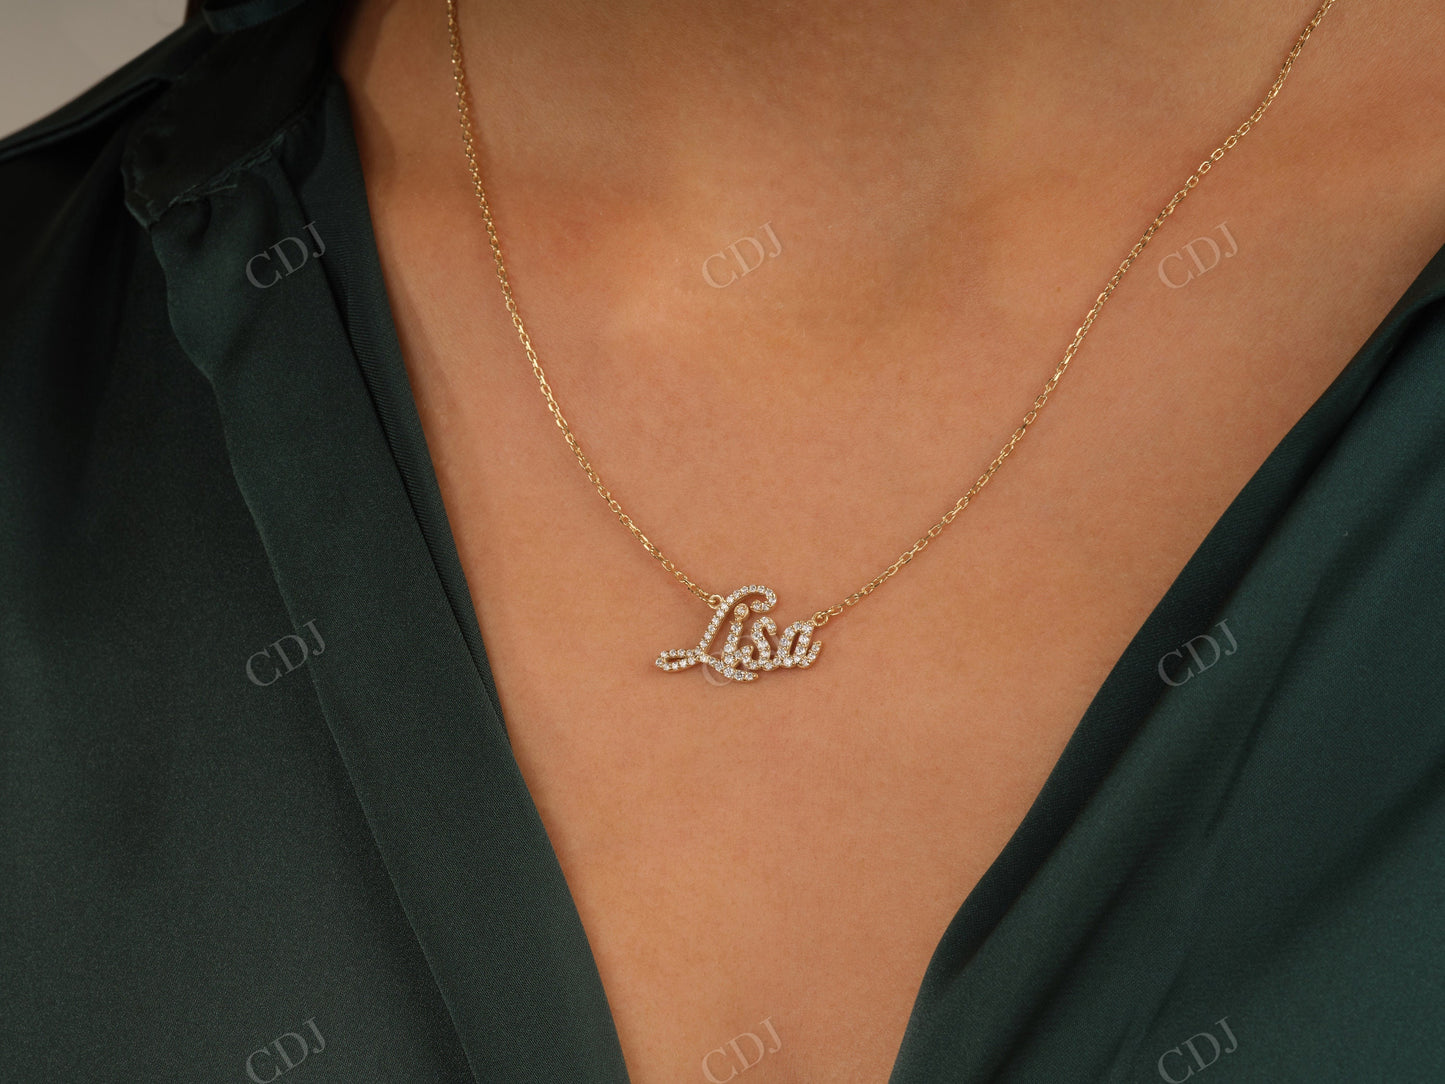 Unique Personalized Moissanite Name Necklace With Cable Chain